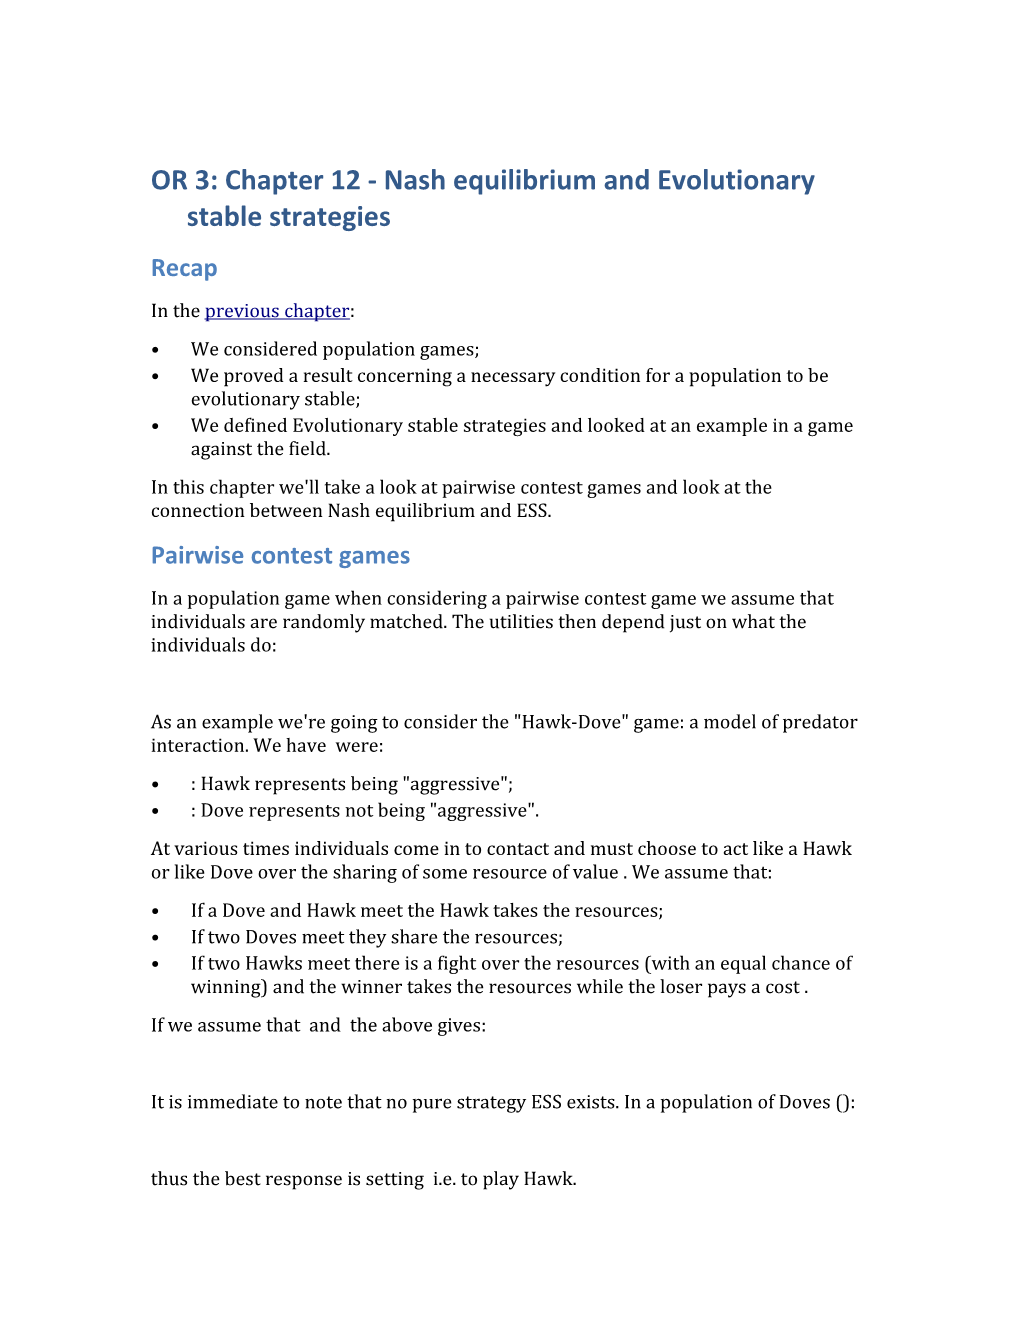 OR 3: Chapter 12 - Nash Equilibrium and Evolutionary Stable Strategies